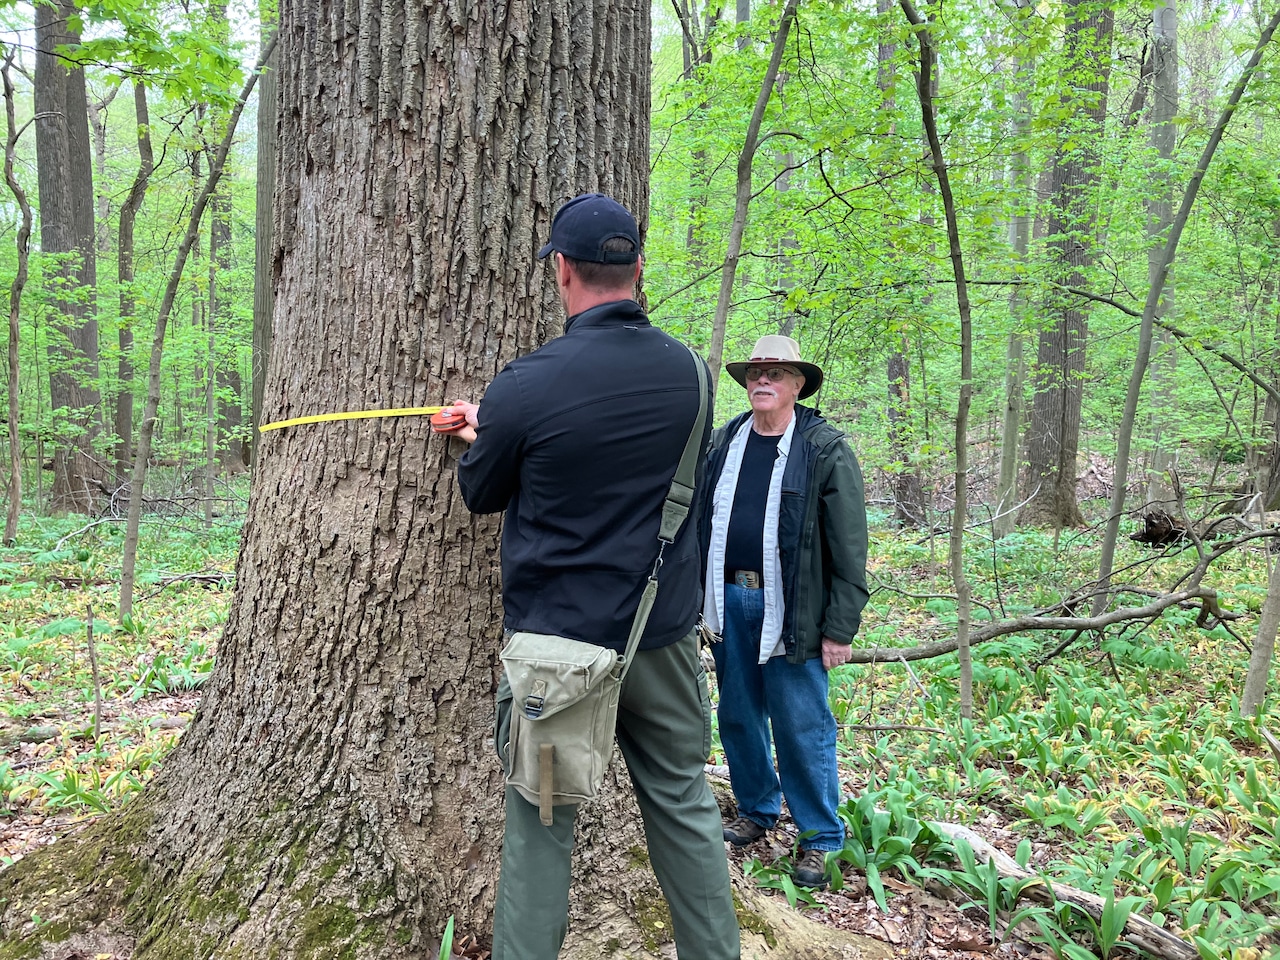 Article on old-growth forest near Cleveland points to need to preserve forest protections in Farm Bill [Video]